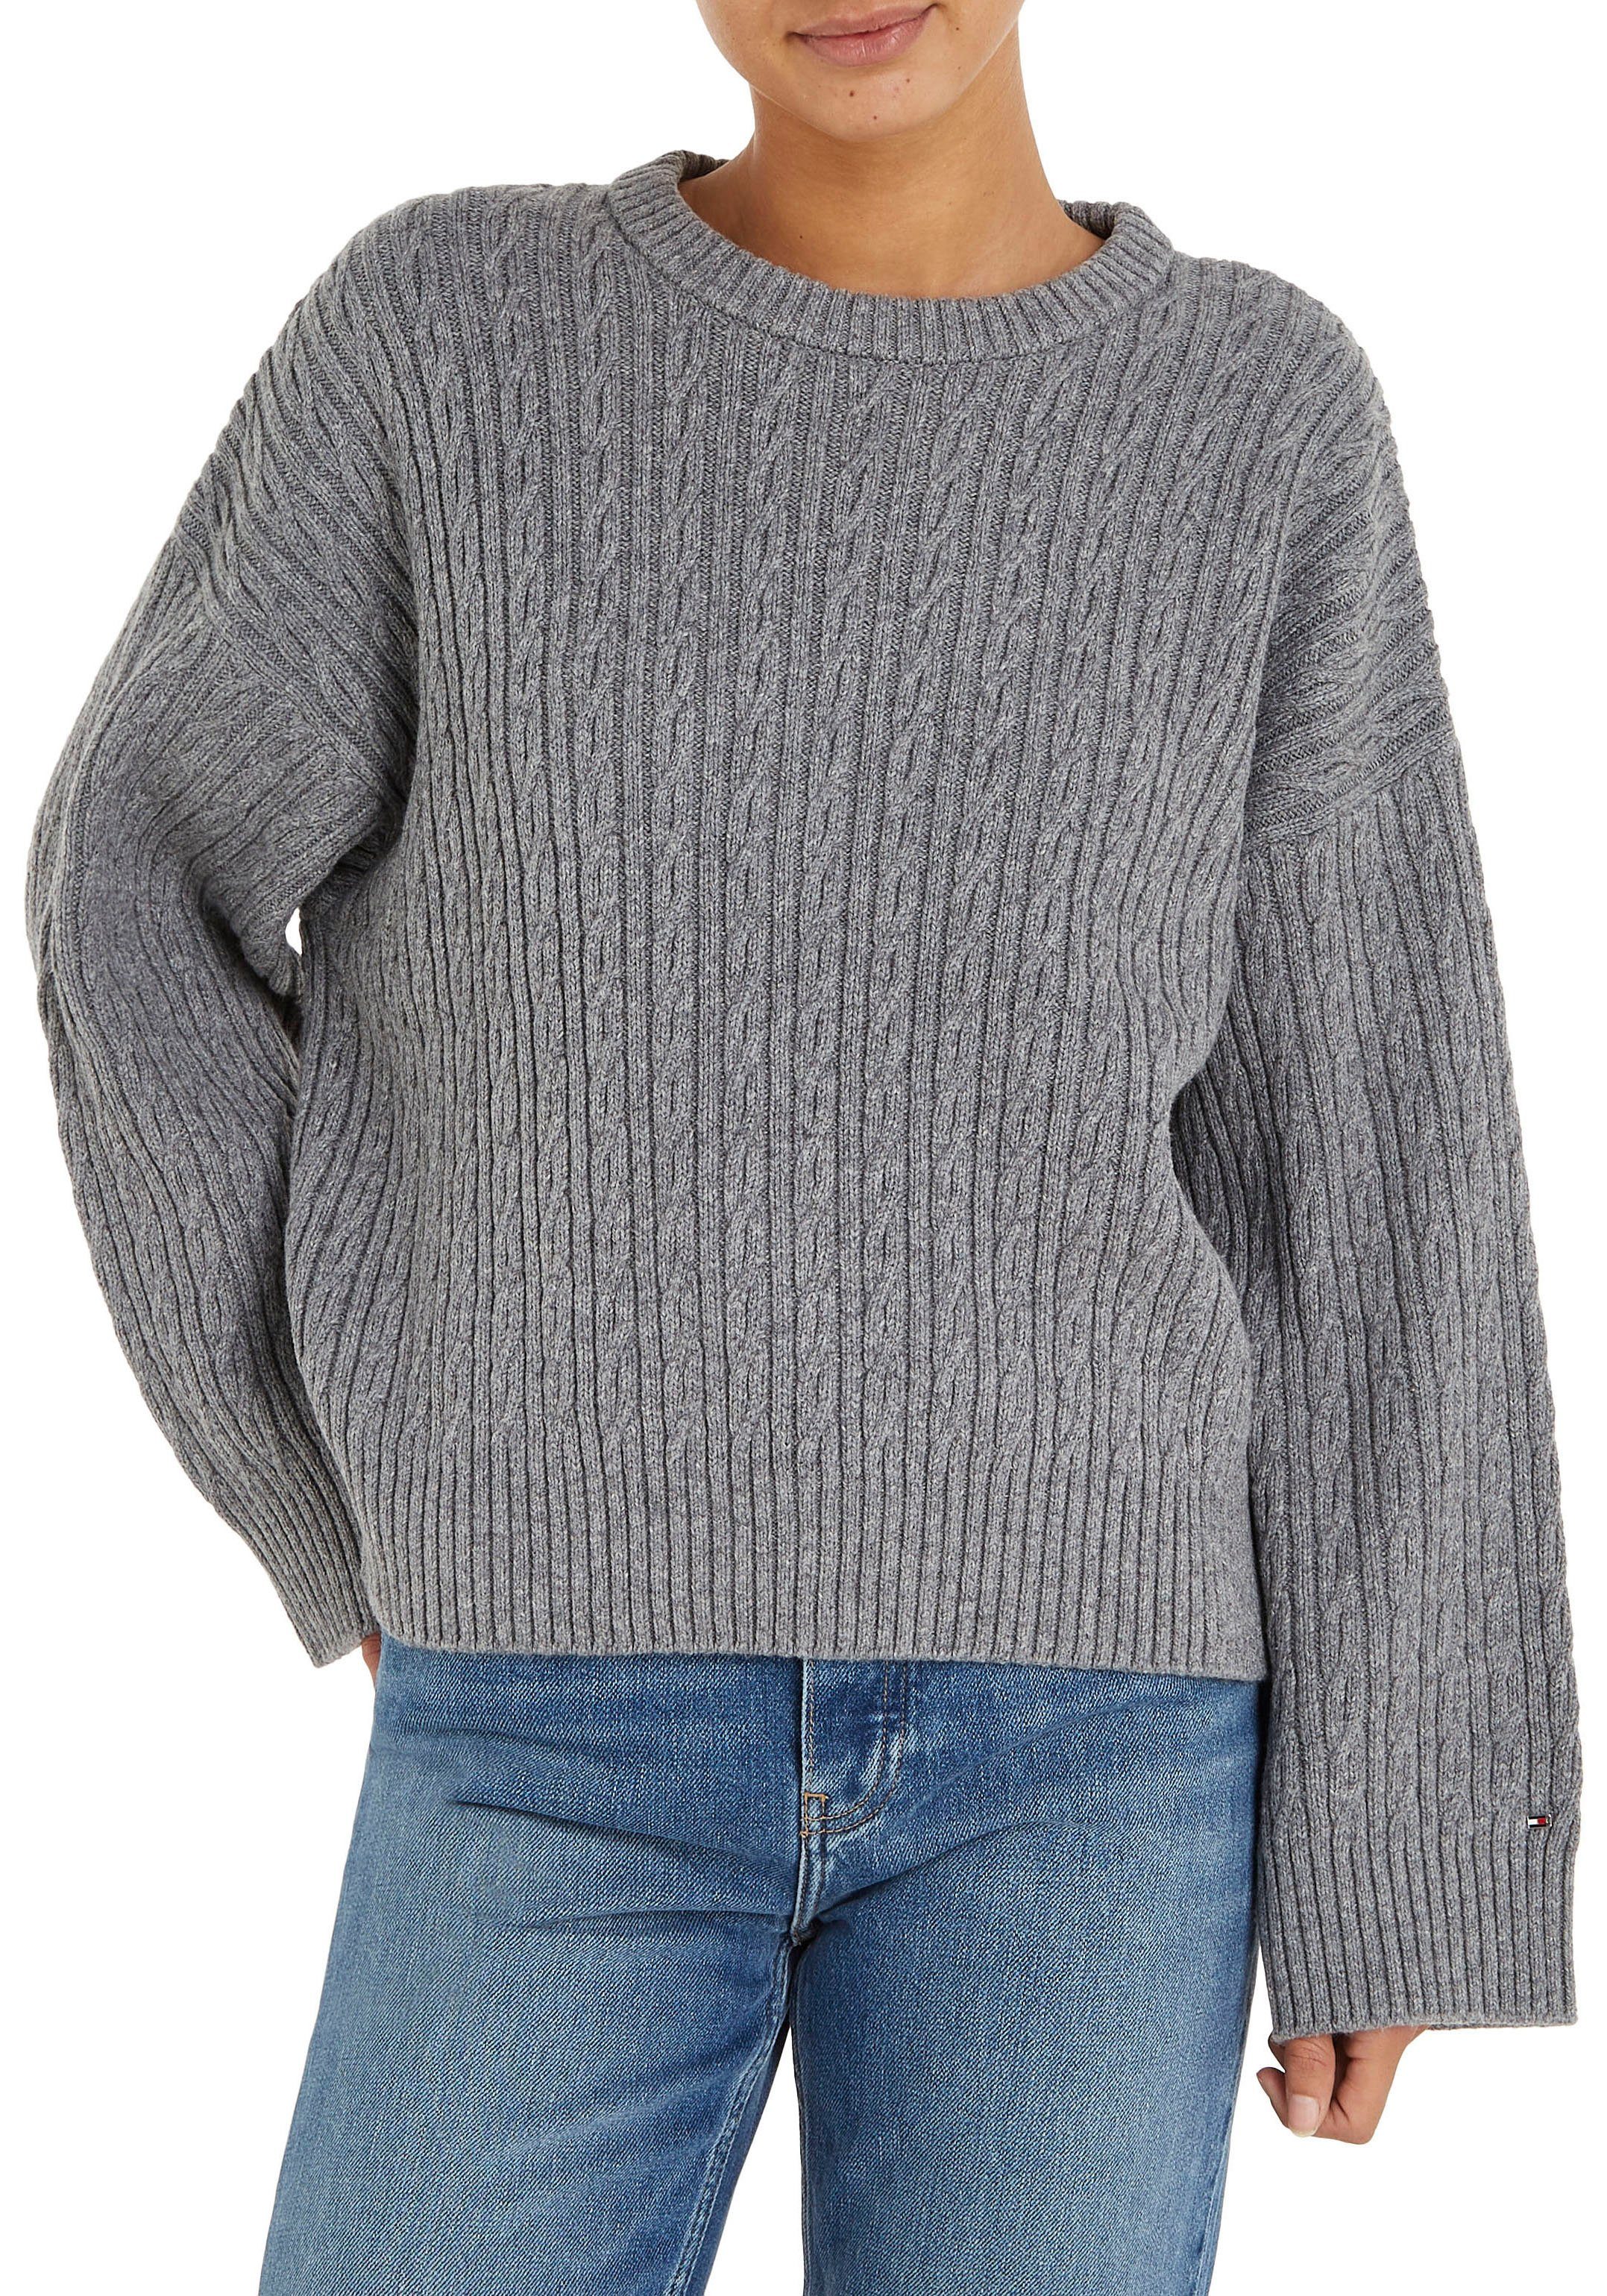 Med_Heather_Grey SWEATER allover ALL OVER C-NK CABLE Tommy Hilfiger Zopfmuster Rundhalspullover mit